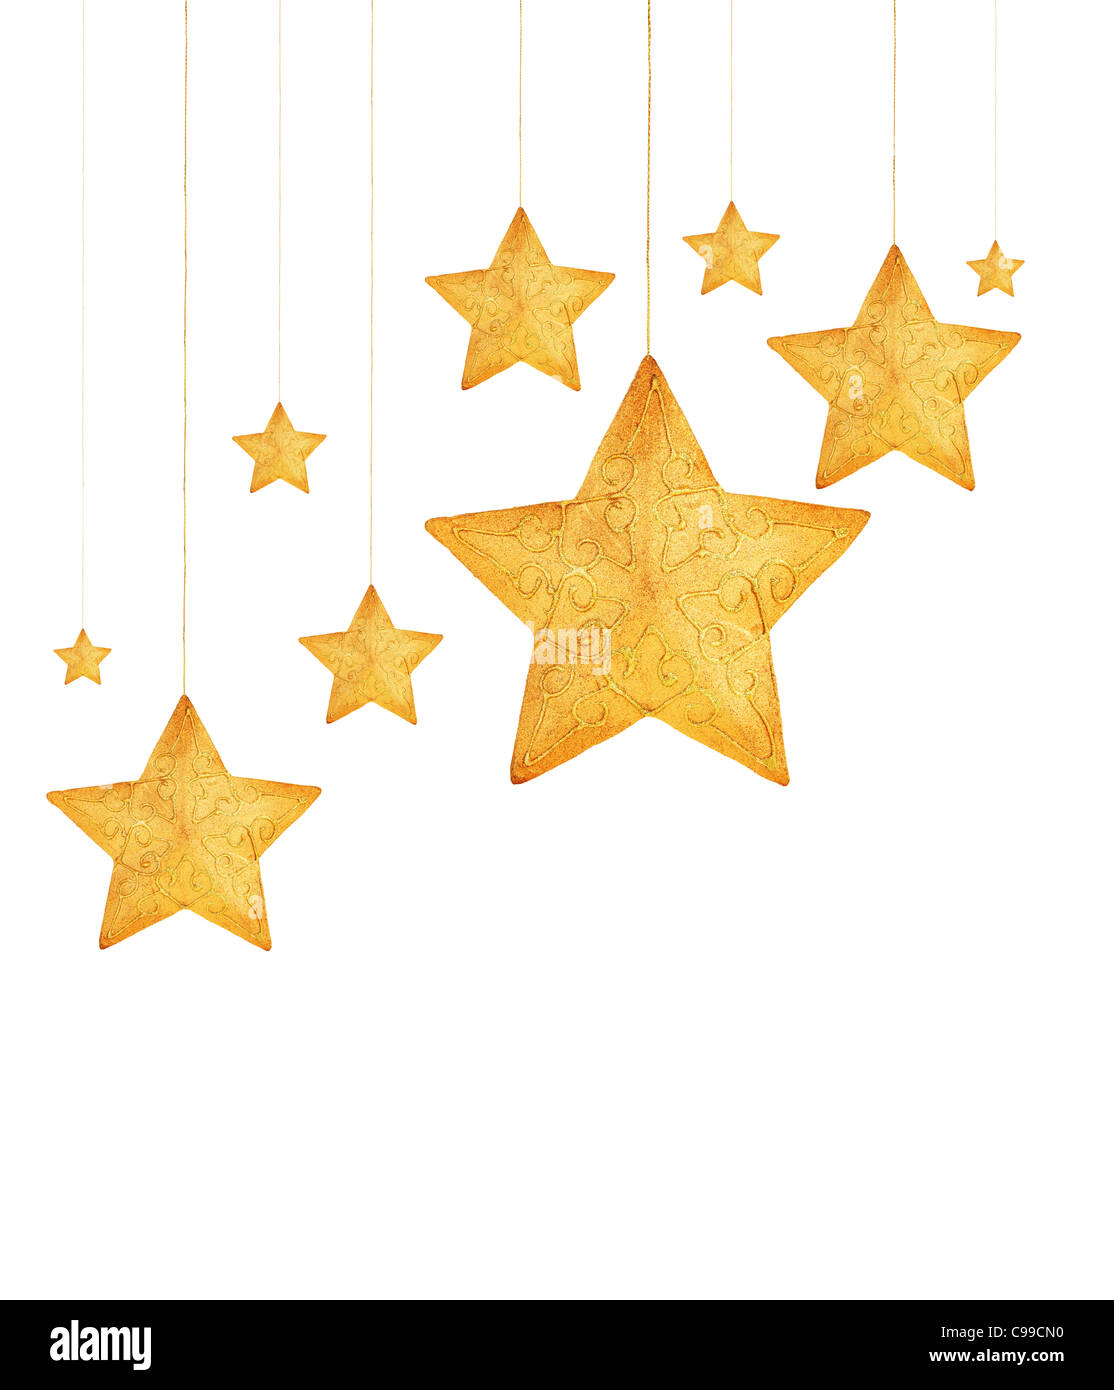 Golden stars, Christmas tree ornaments and holiday decorations isolated on white background Stock Photo